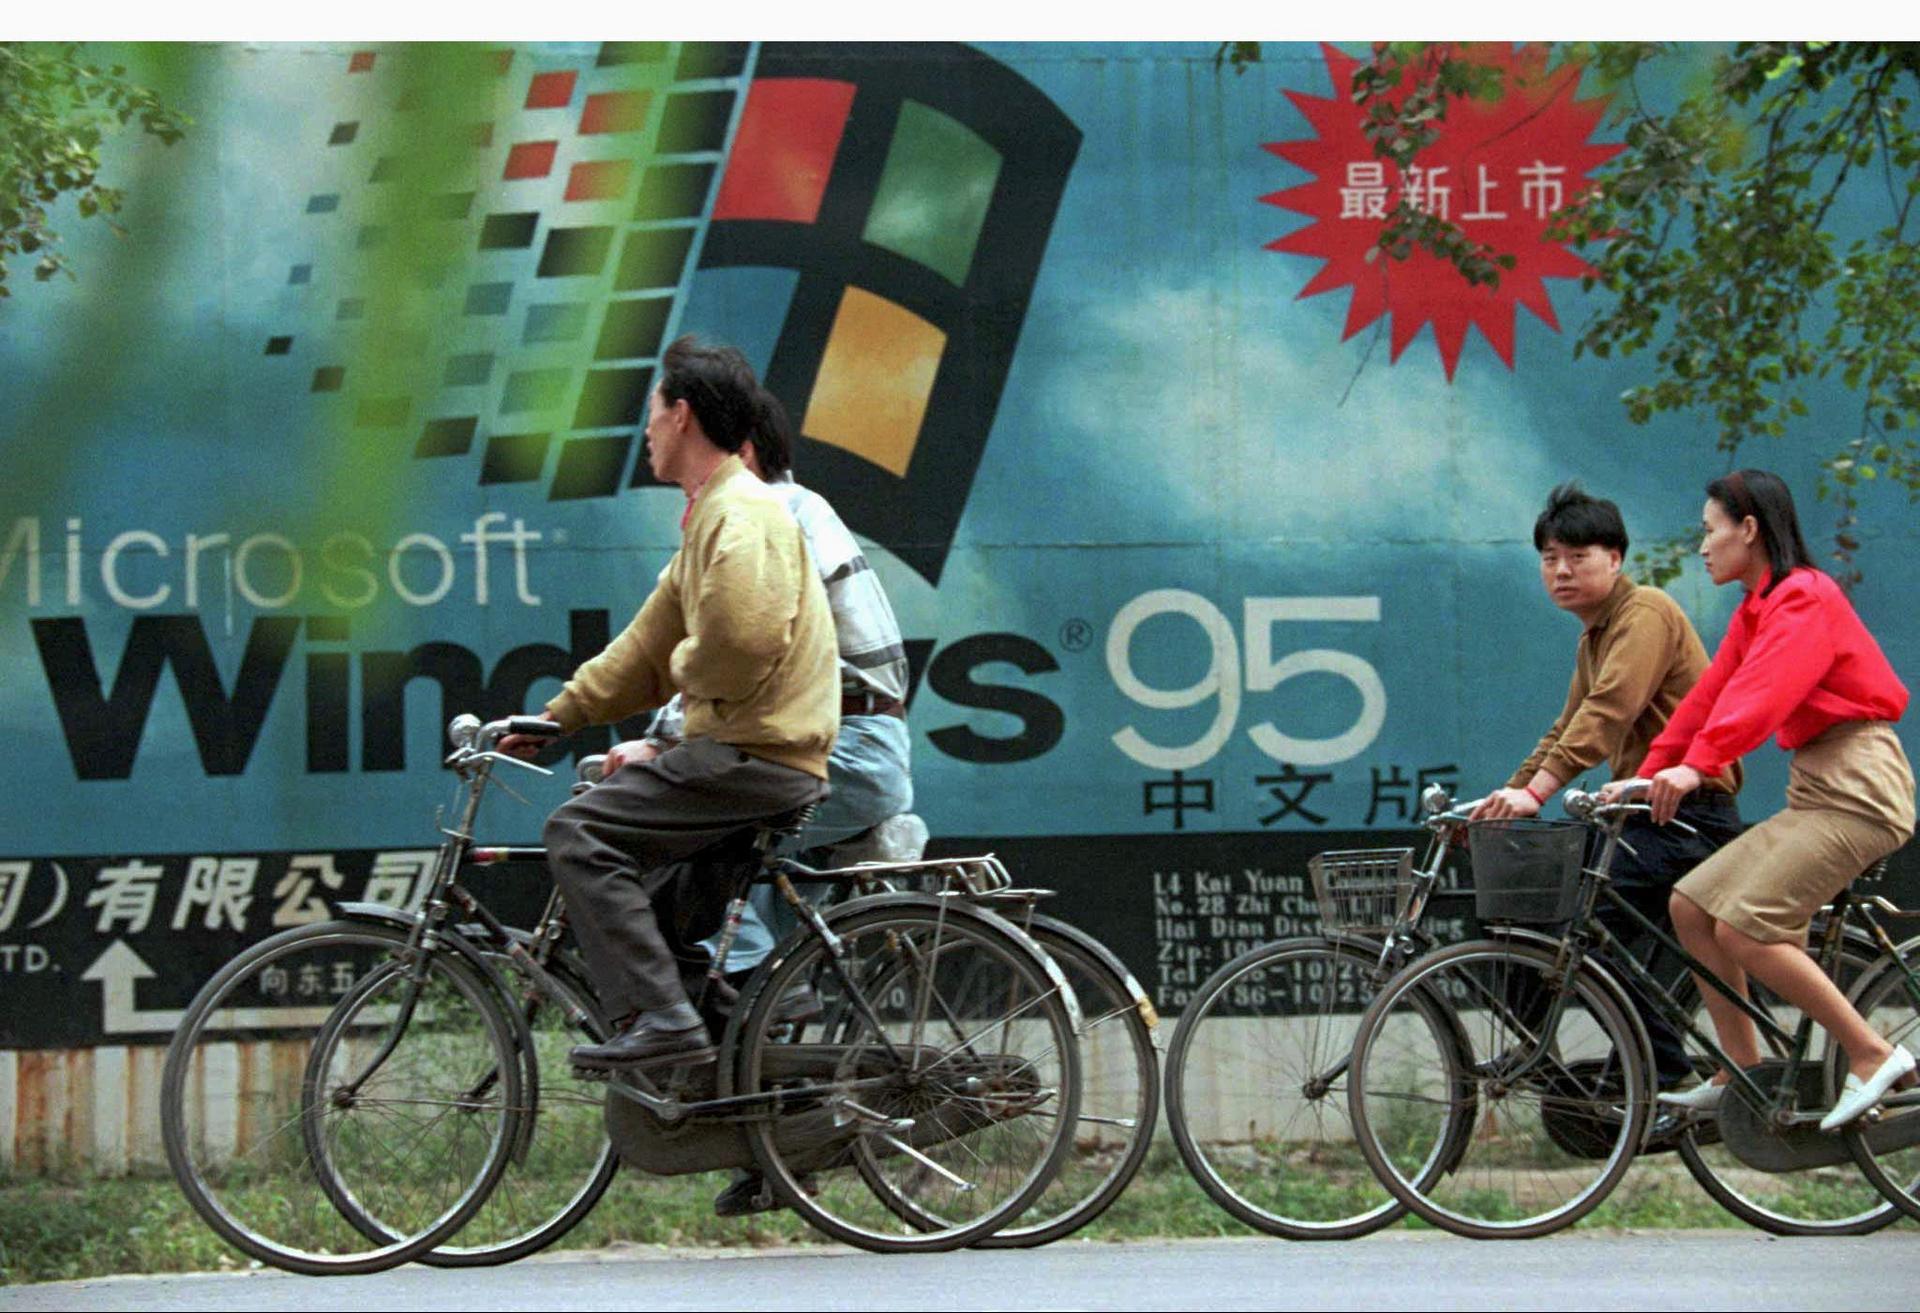 In its early years, Microsoft struggled in China as it remained somewhat inward focused. Photo: Reuters